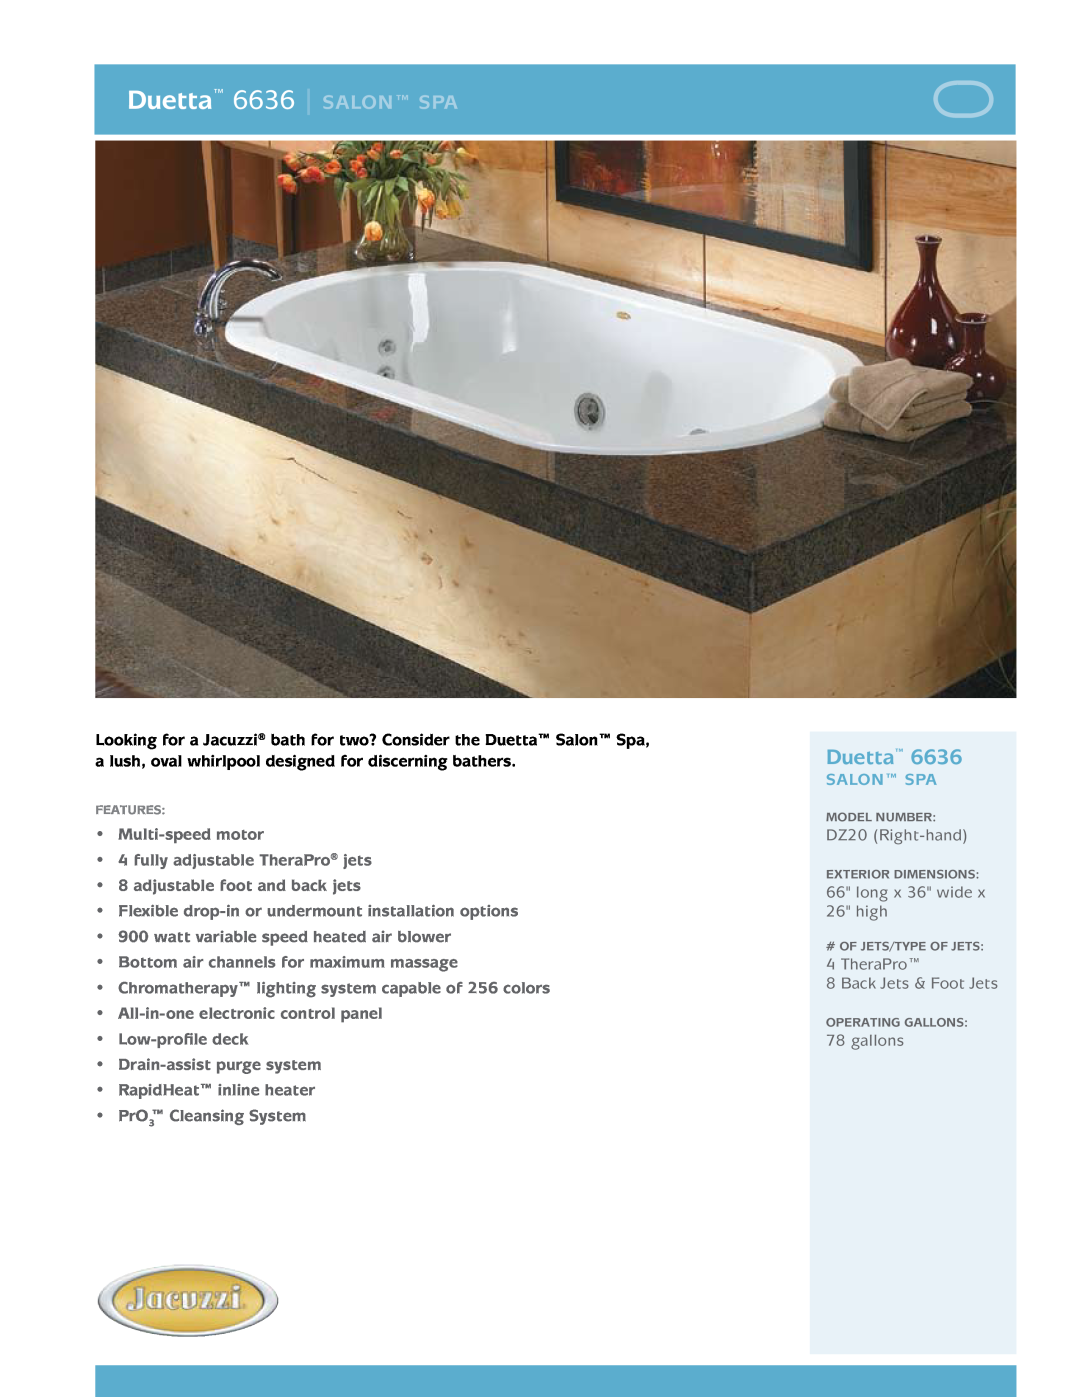 Jacuzzi manual DZ20 Right-hand, long x 36 wide x 26 high, TheraPro 8 Back Jets & Foot Jets, gallons, Duetta, salon spa 